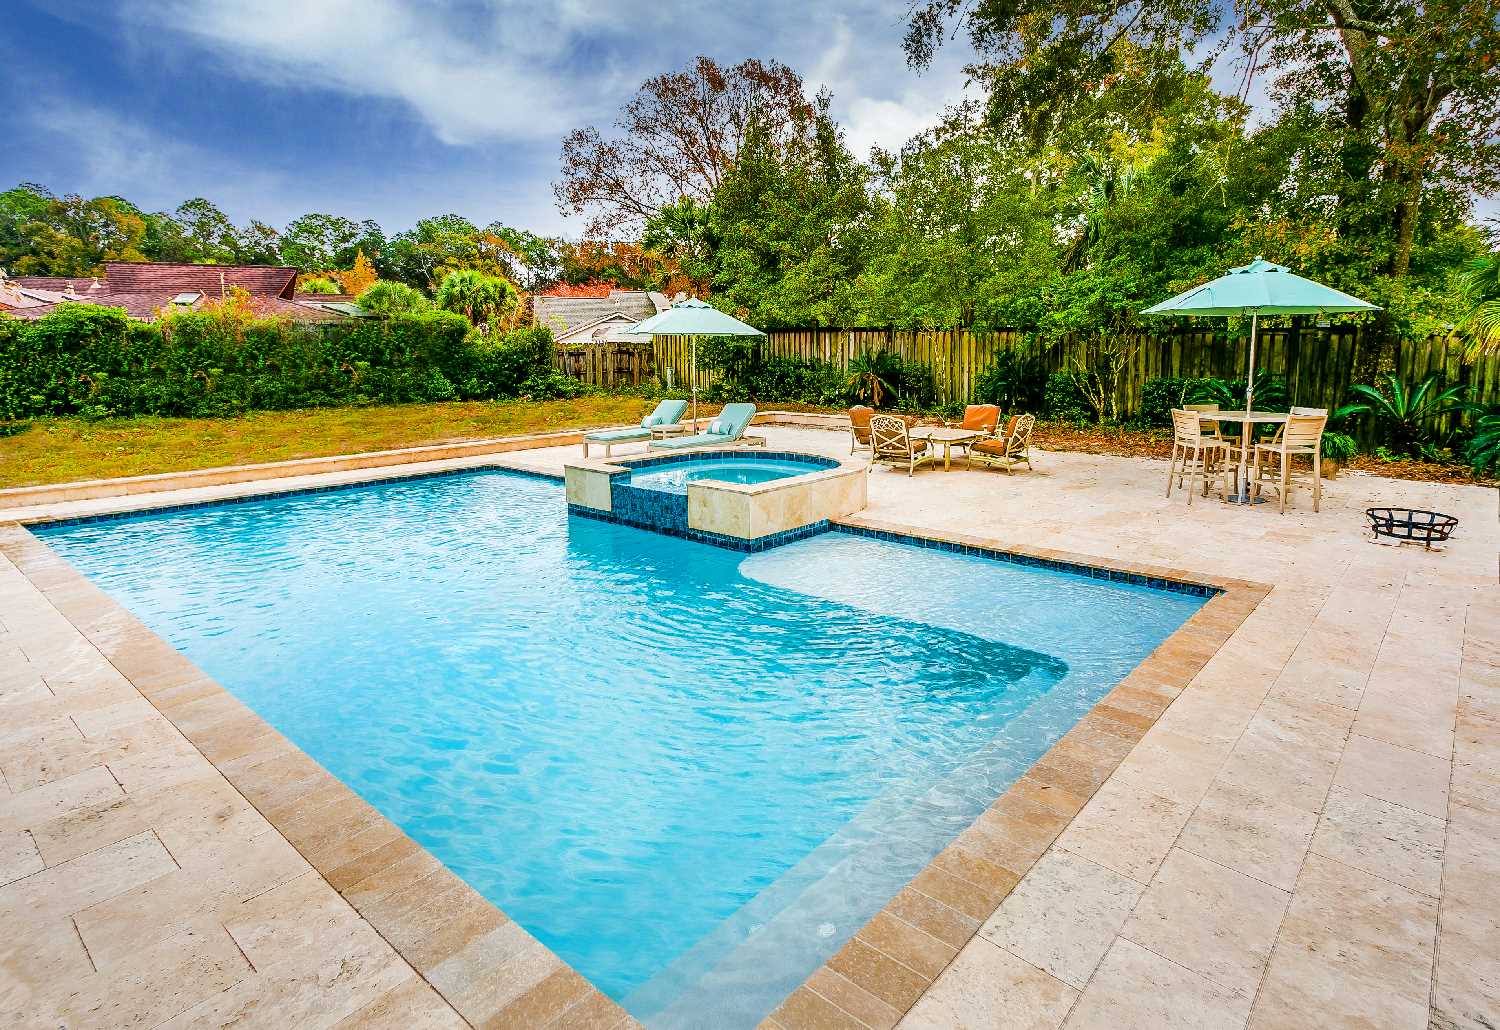 10 things To Remember When Buying a Pool